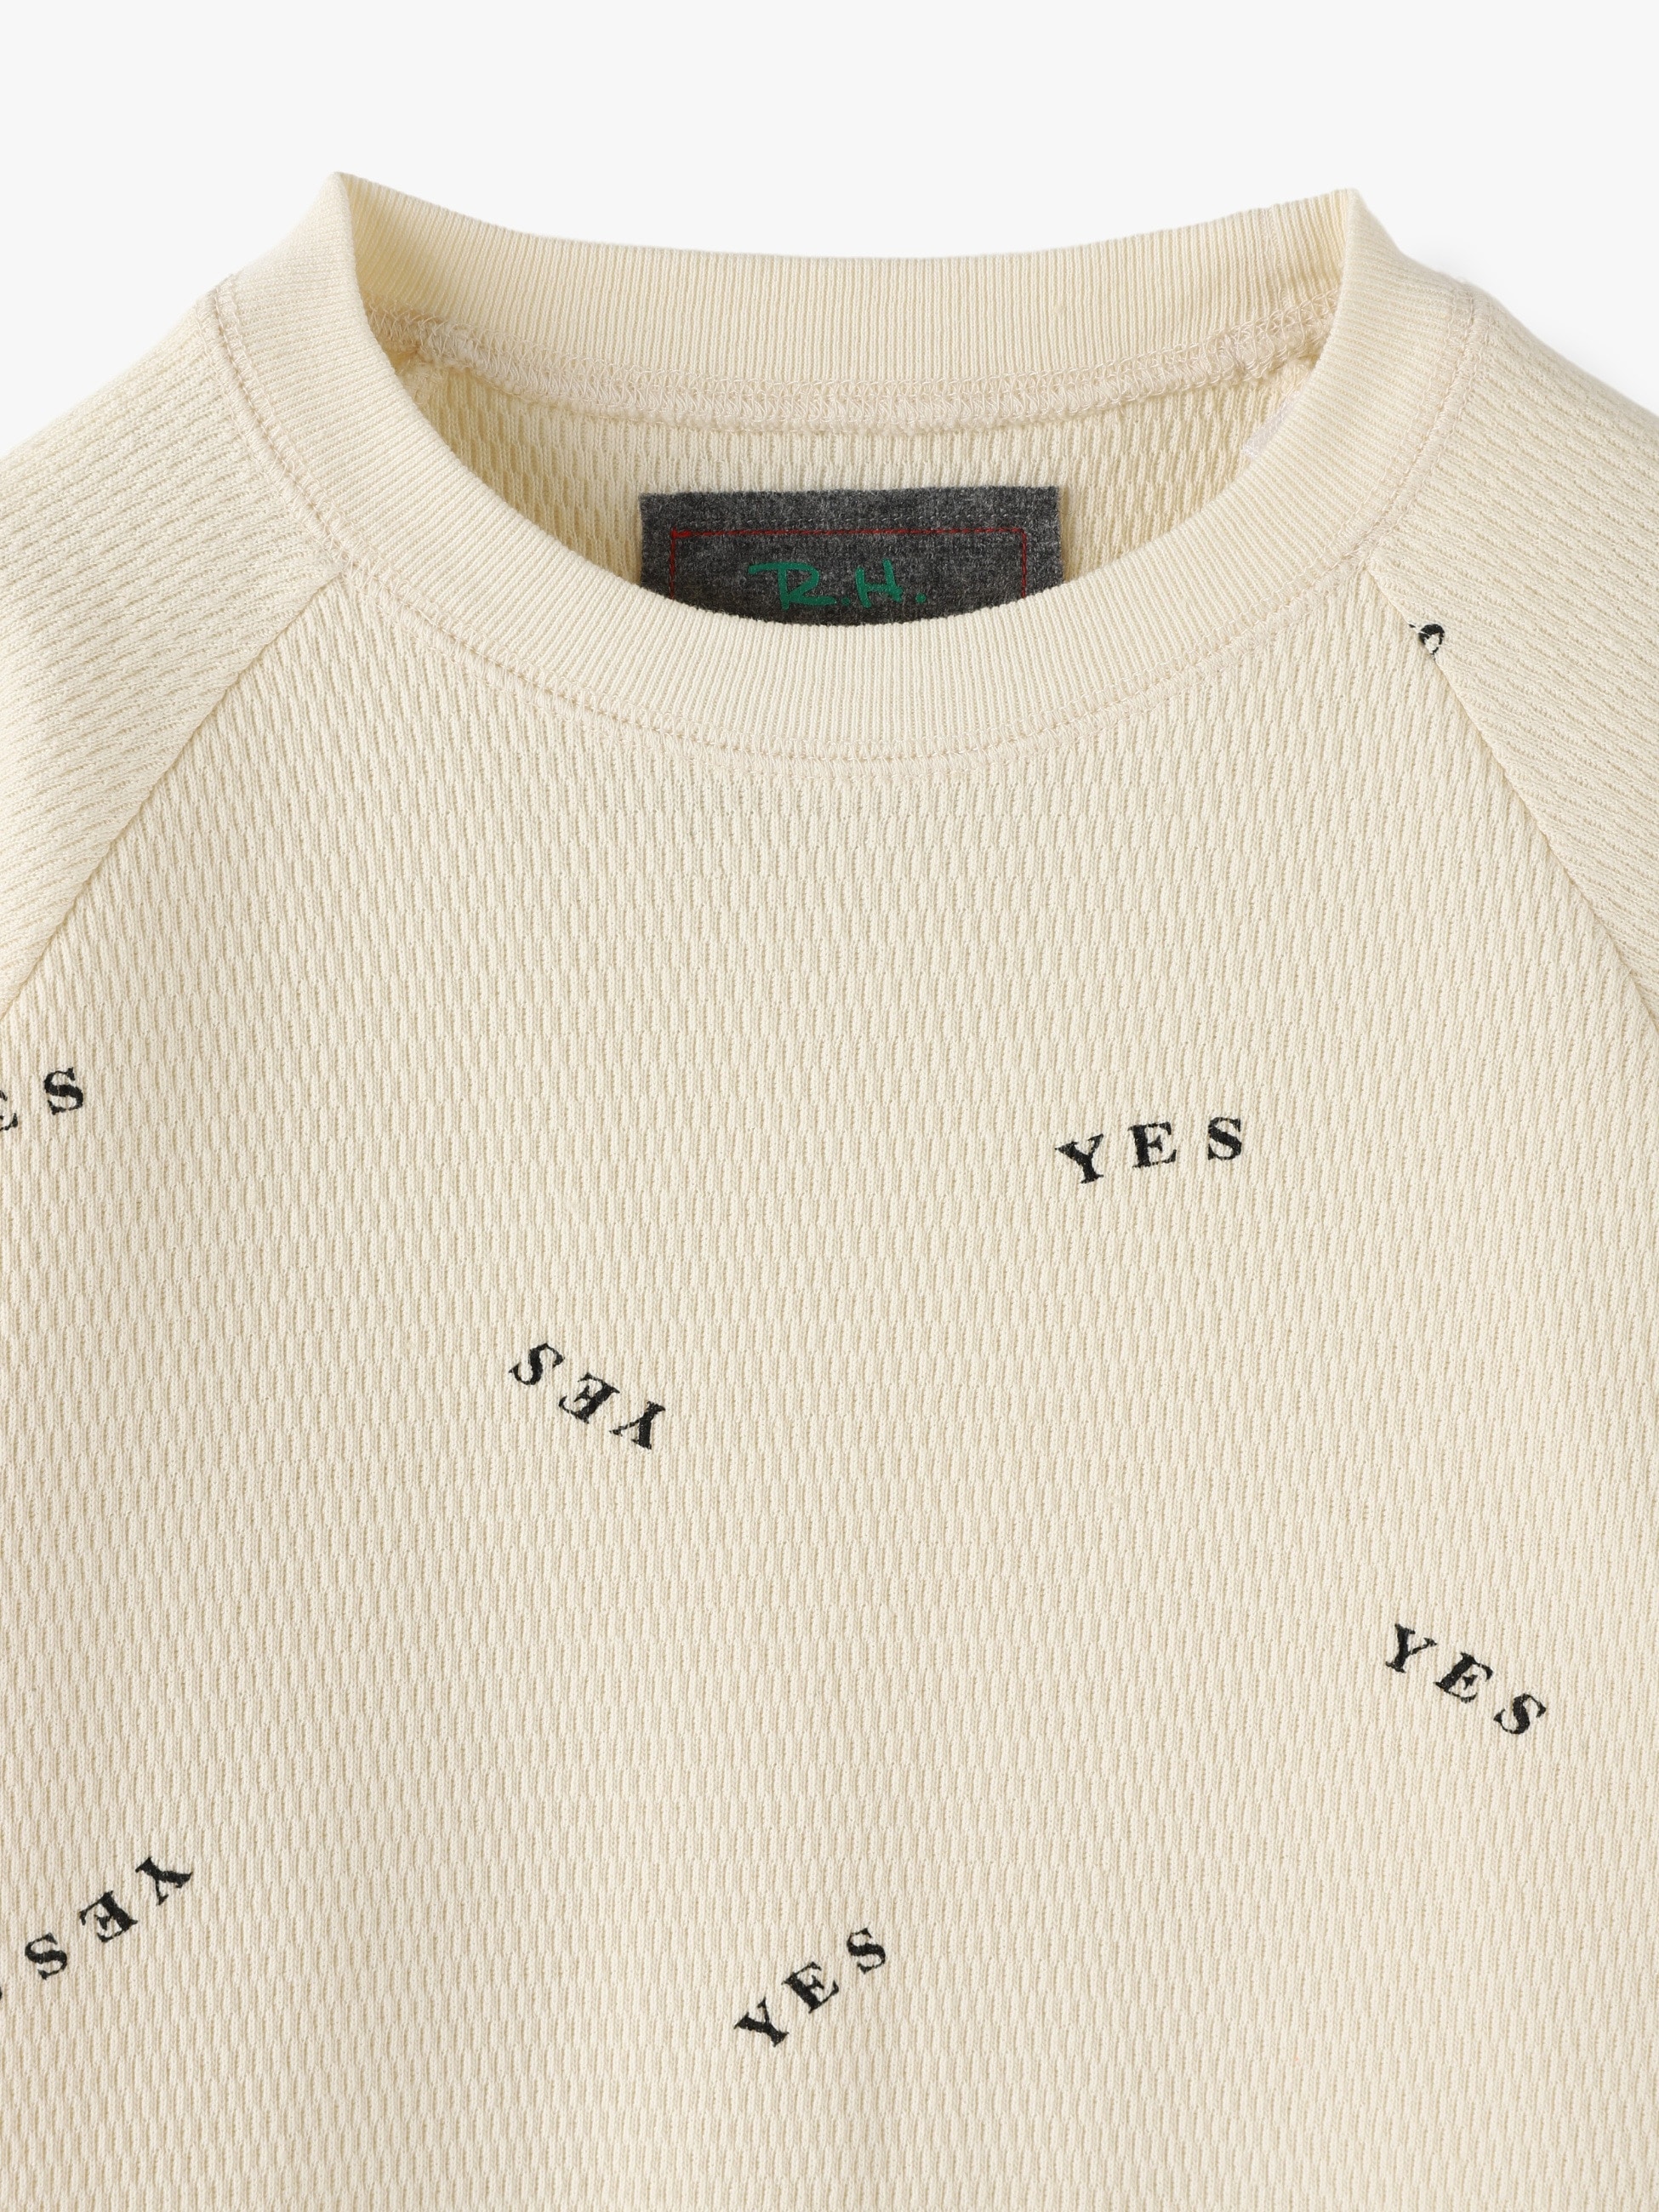 YES Print Waffle Pullover｜RH Vintage(アールエイチ ヴィンテージ 